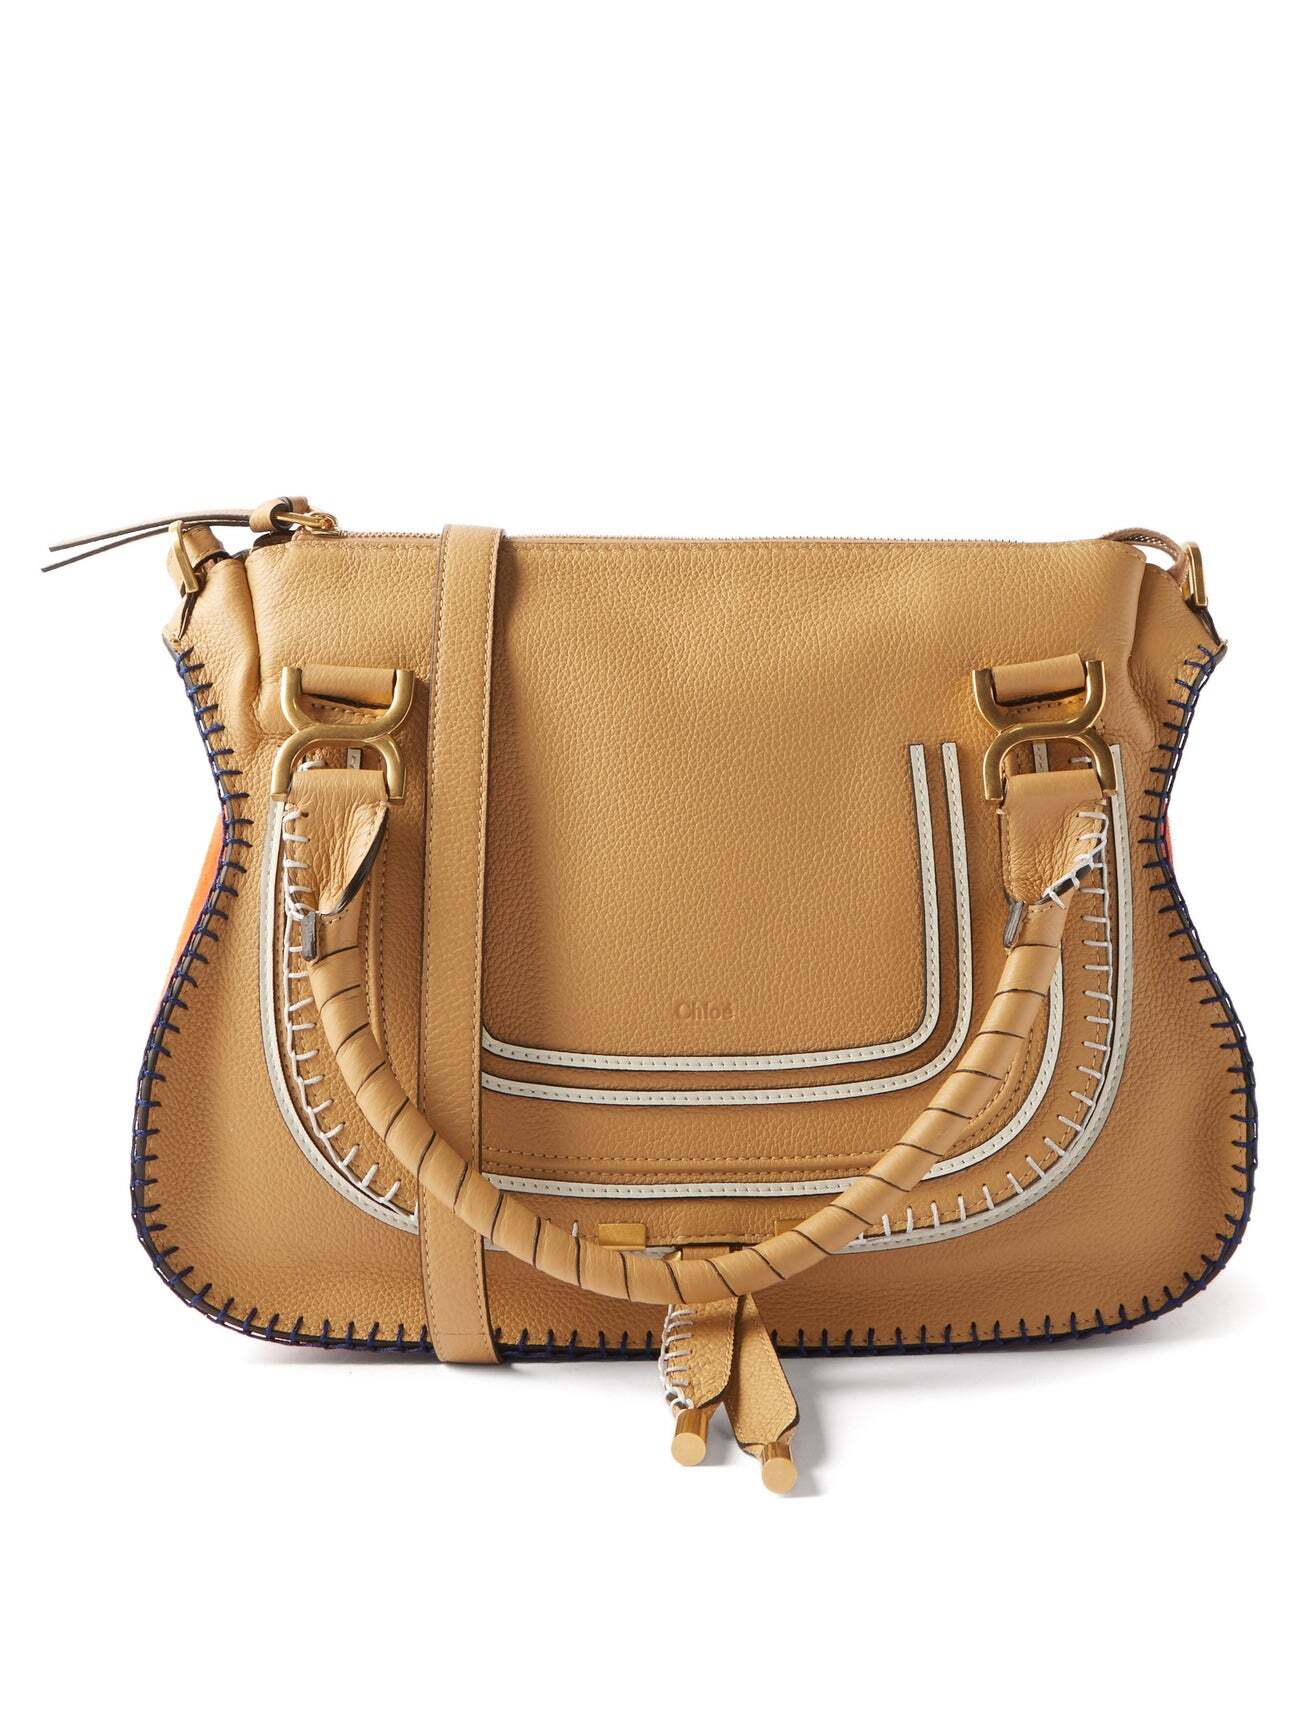 Chloé Chloé - Marcie Topstitched Leather And Suede Handbag - Womens - Beige Multi